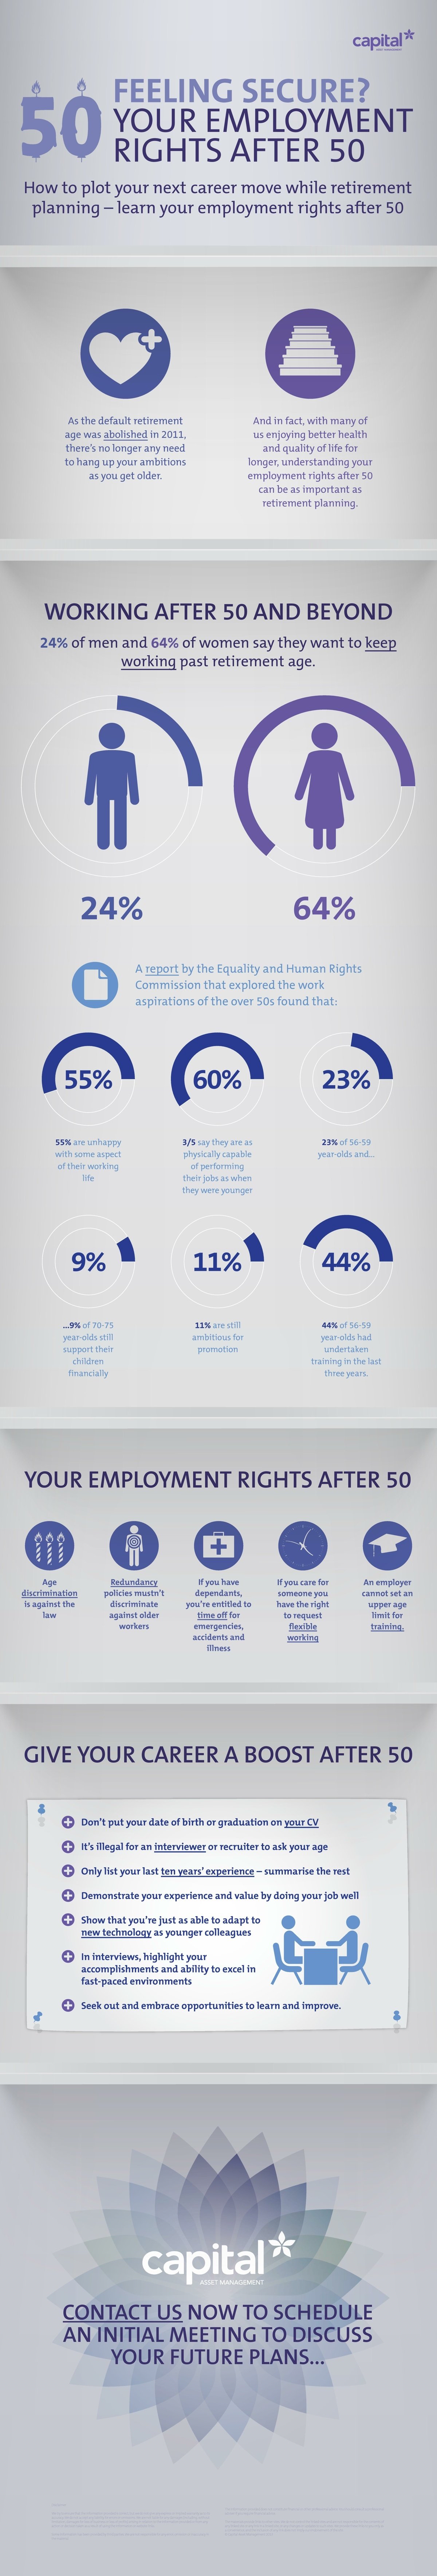 Your Employment Rights After 50 Infographic